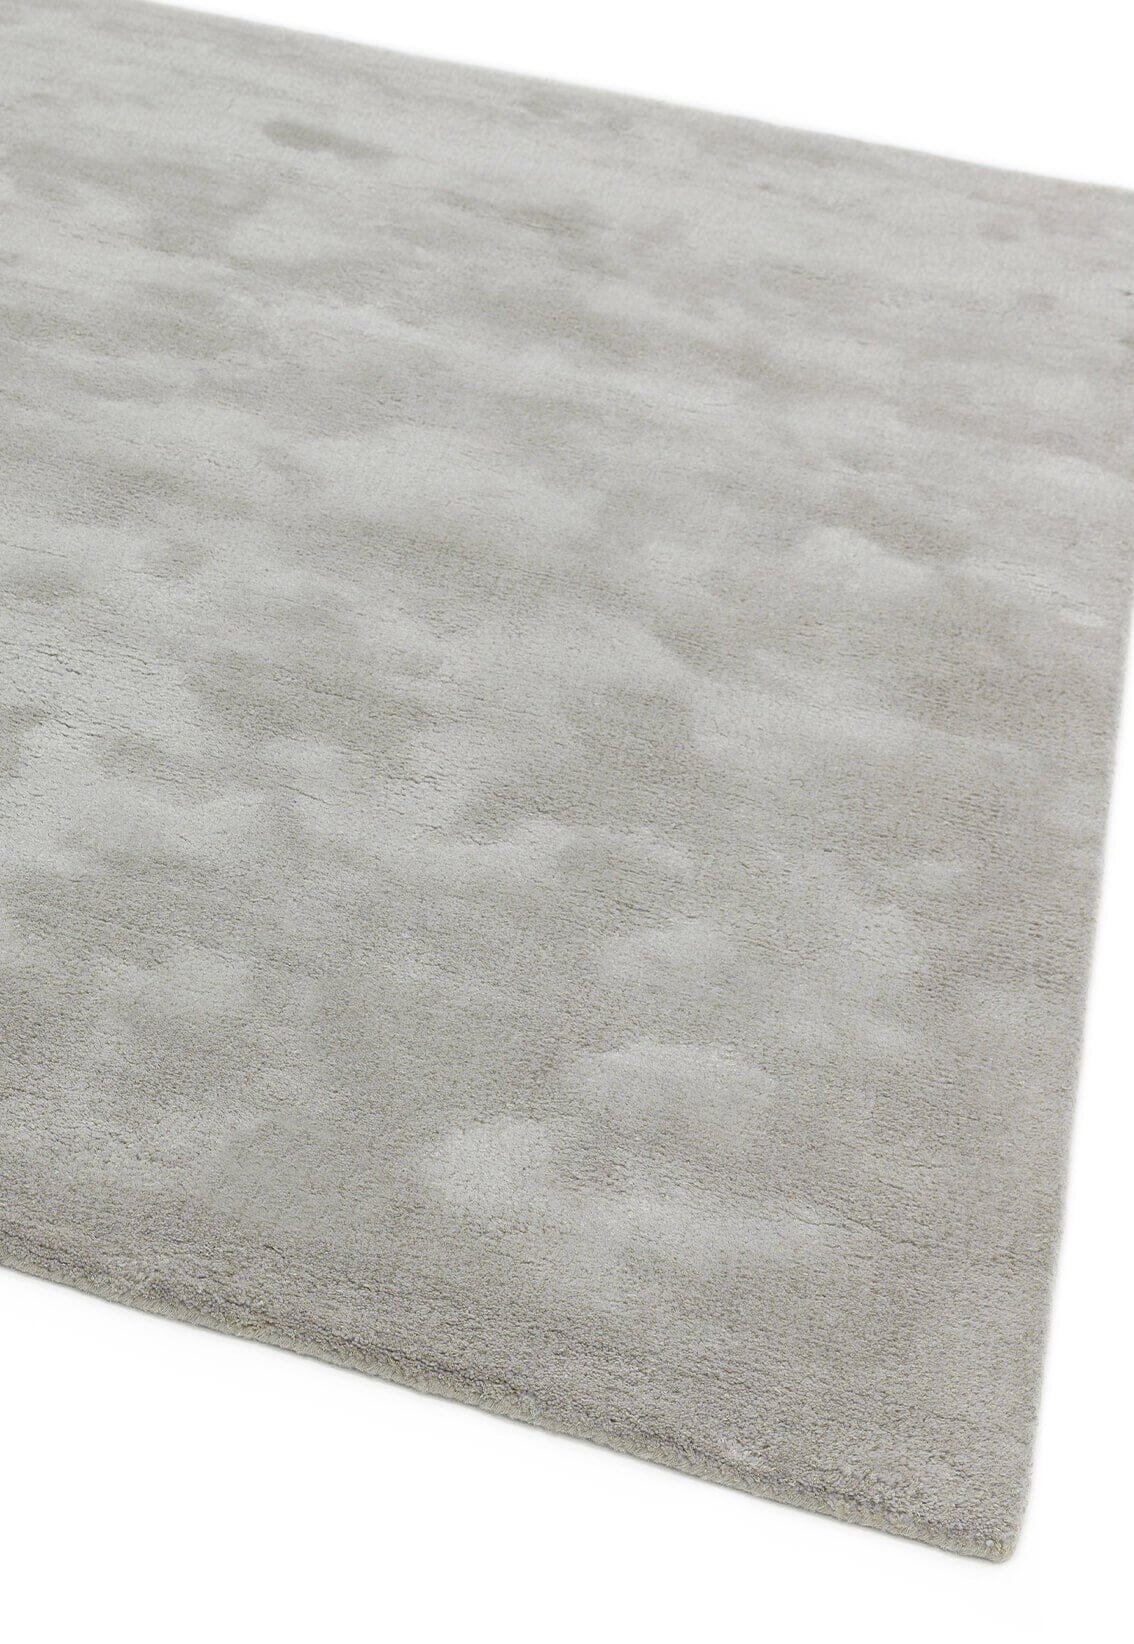  Asiatic Carpets-Asiatic Carpets Aran Hand Woven Rug Feather Grey - 120 x 180cm-Grey, Silver 373 